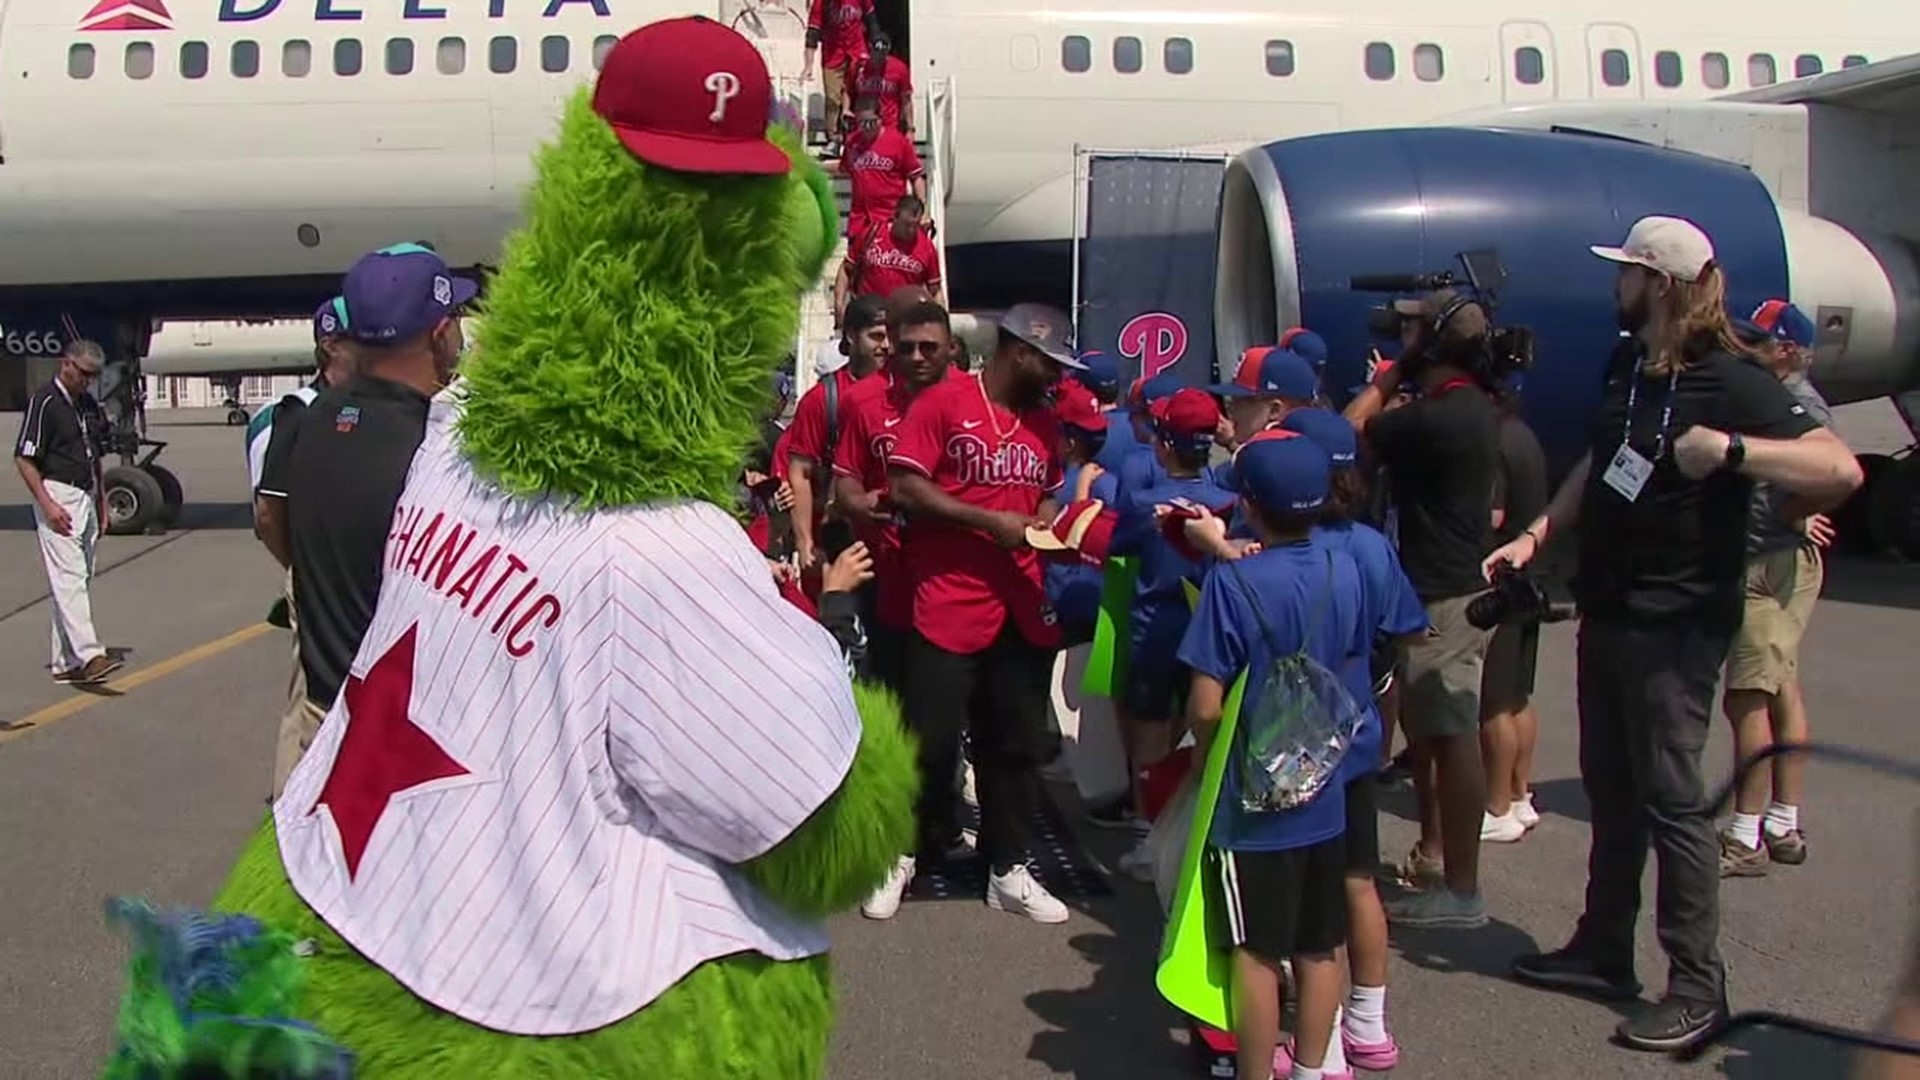 The MLB Classic took over Williamsport Sunday, but before the Phillies and Nationals slug it out, the teams spent the day meeting the little leaguers.